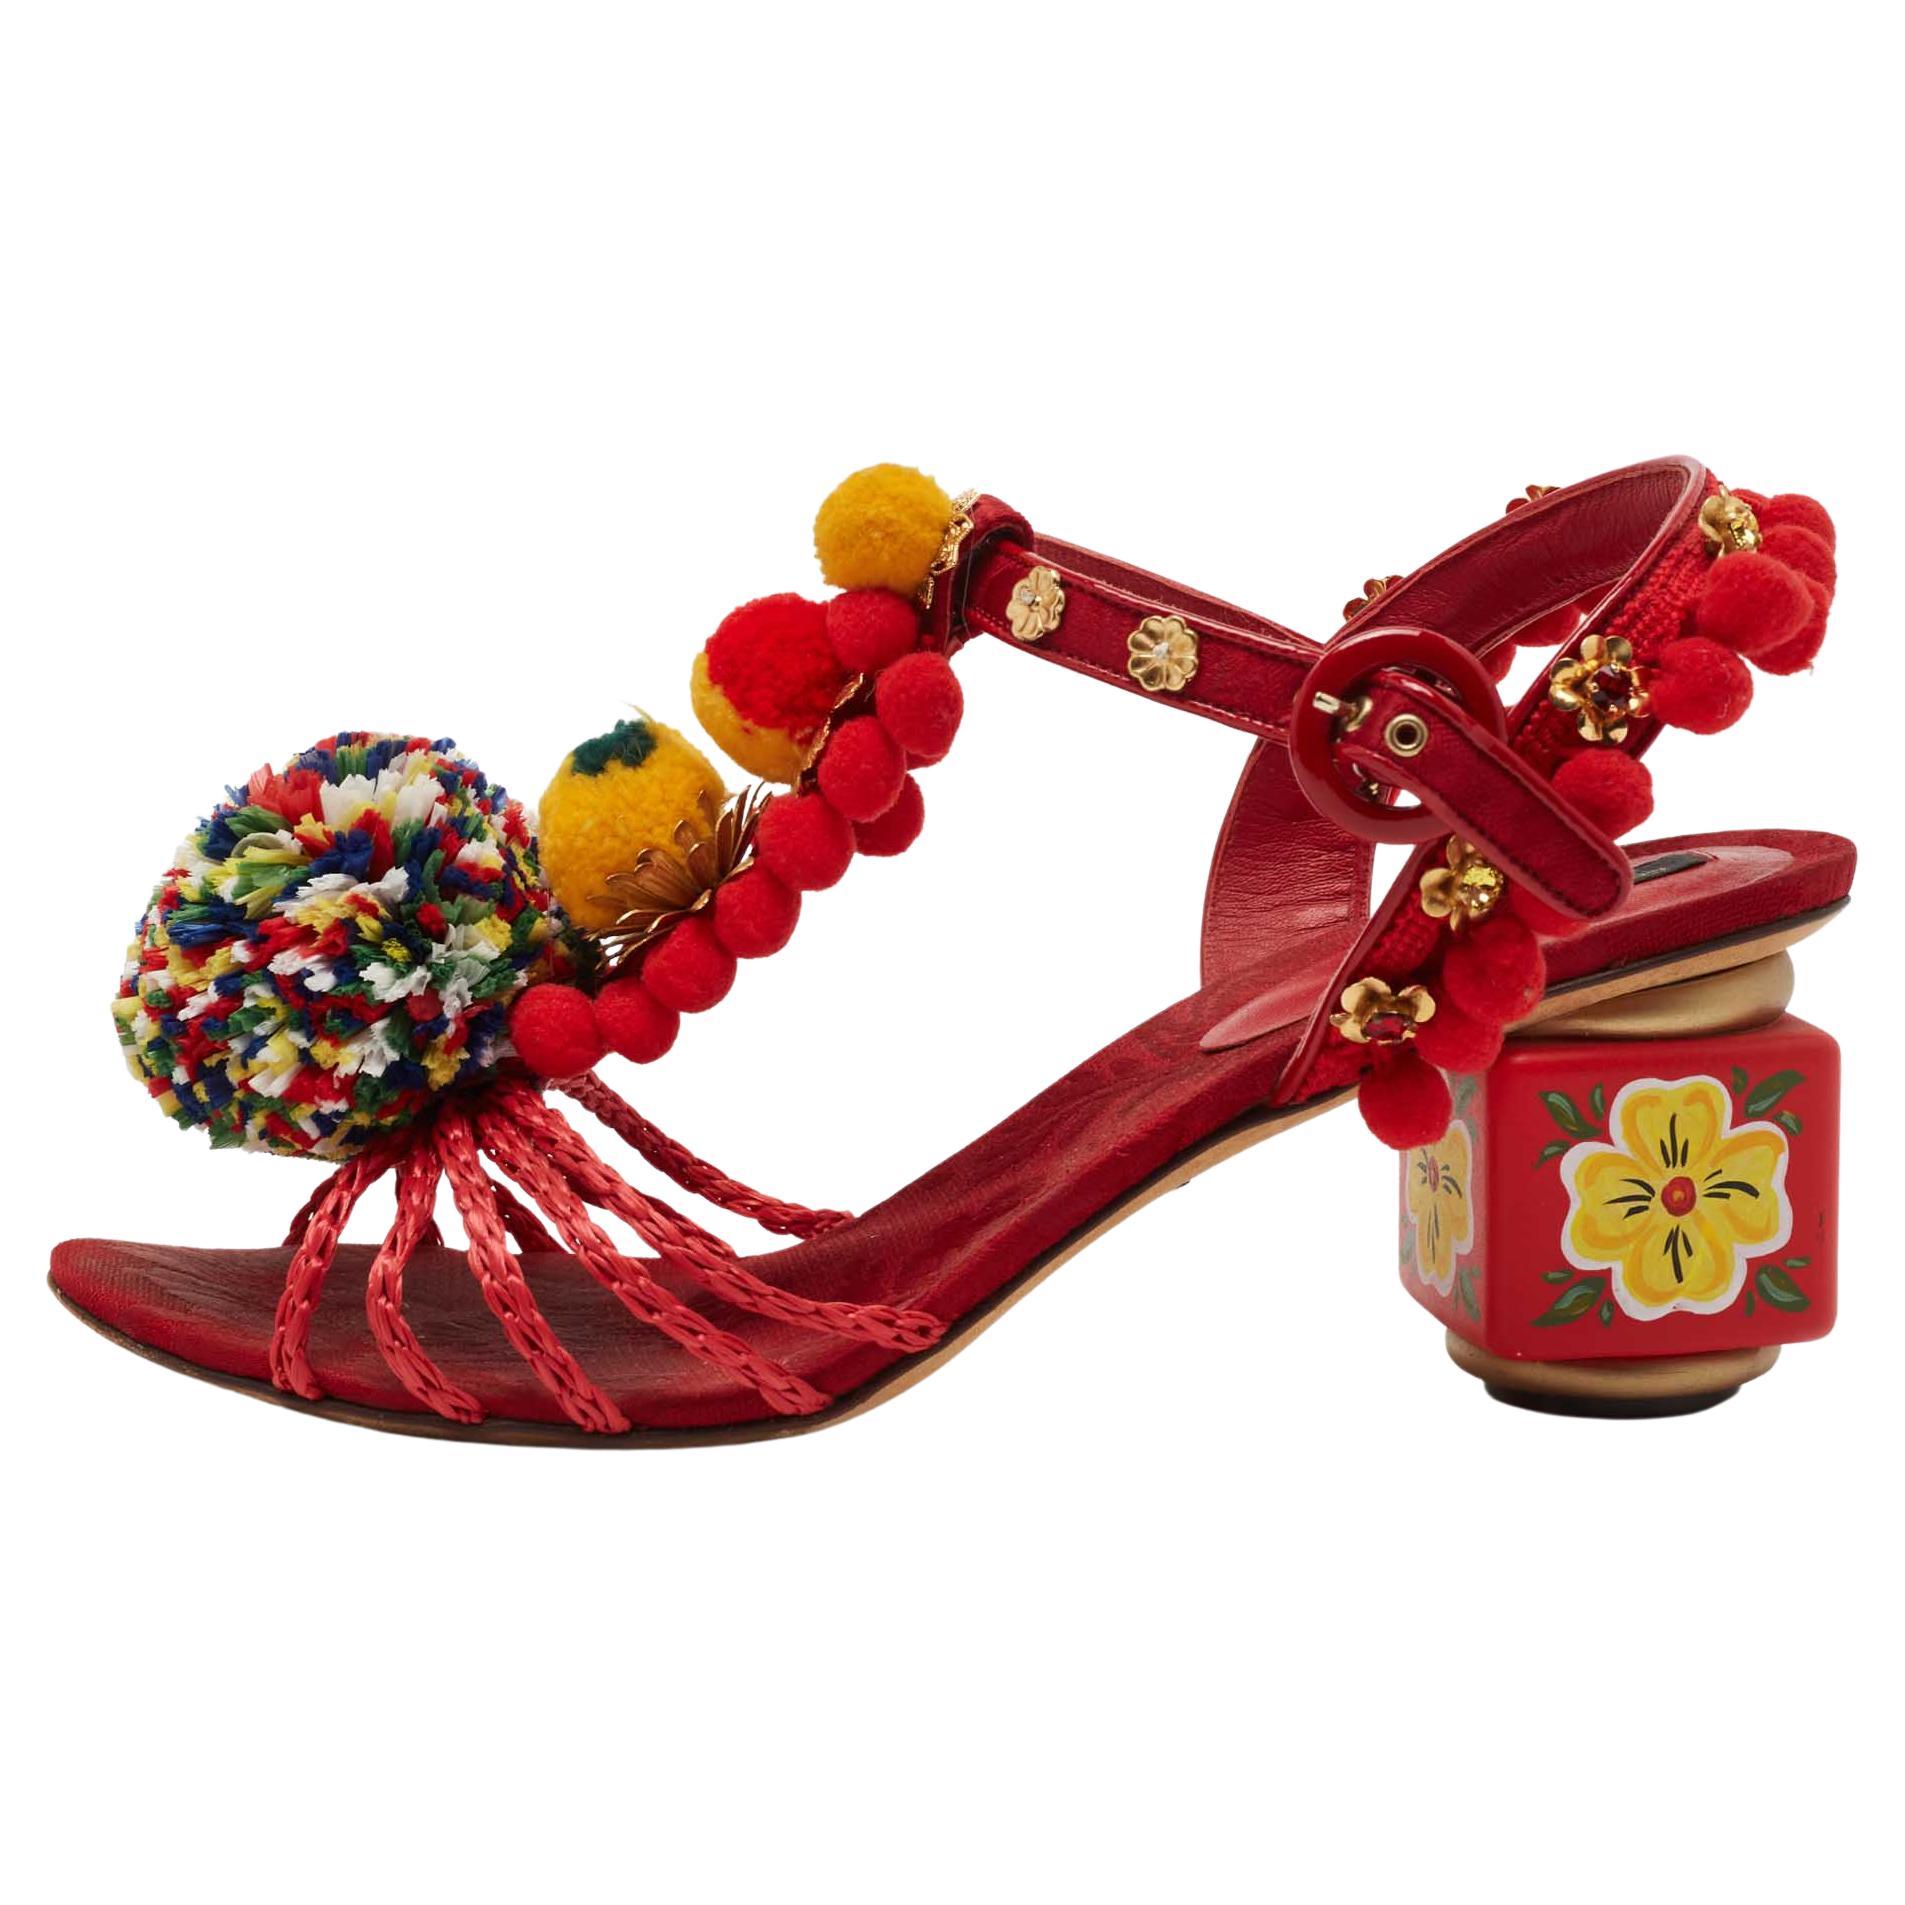 Dolce & Gabbana Multicolor Leather and Fabric Pom Pom Sandals Size 39 For Sale